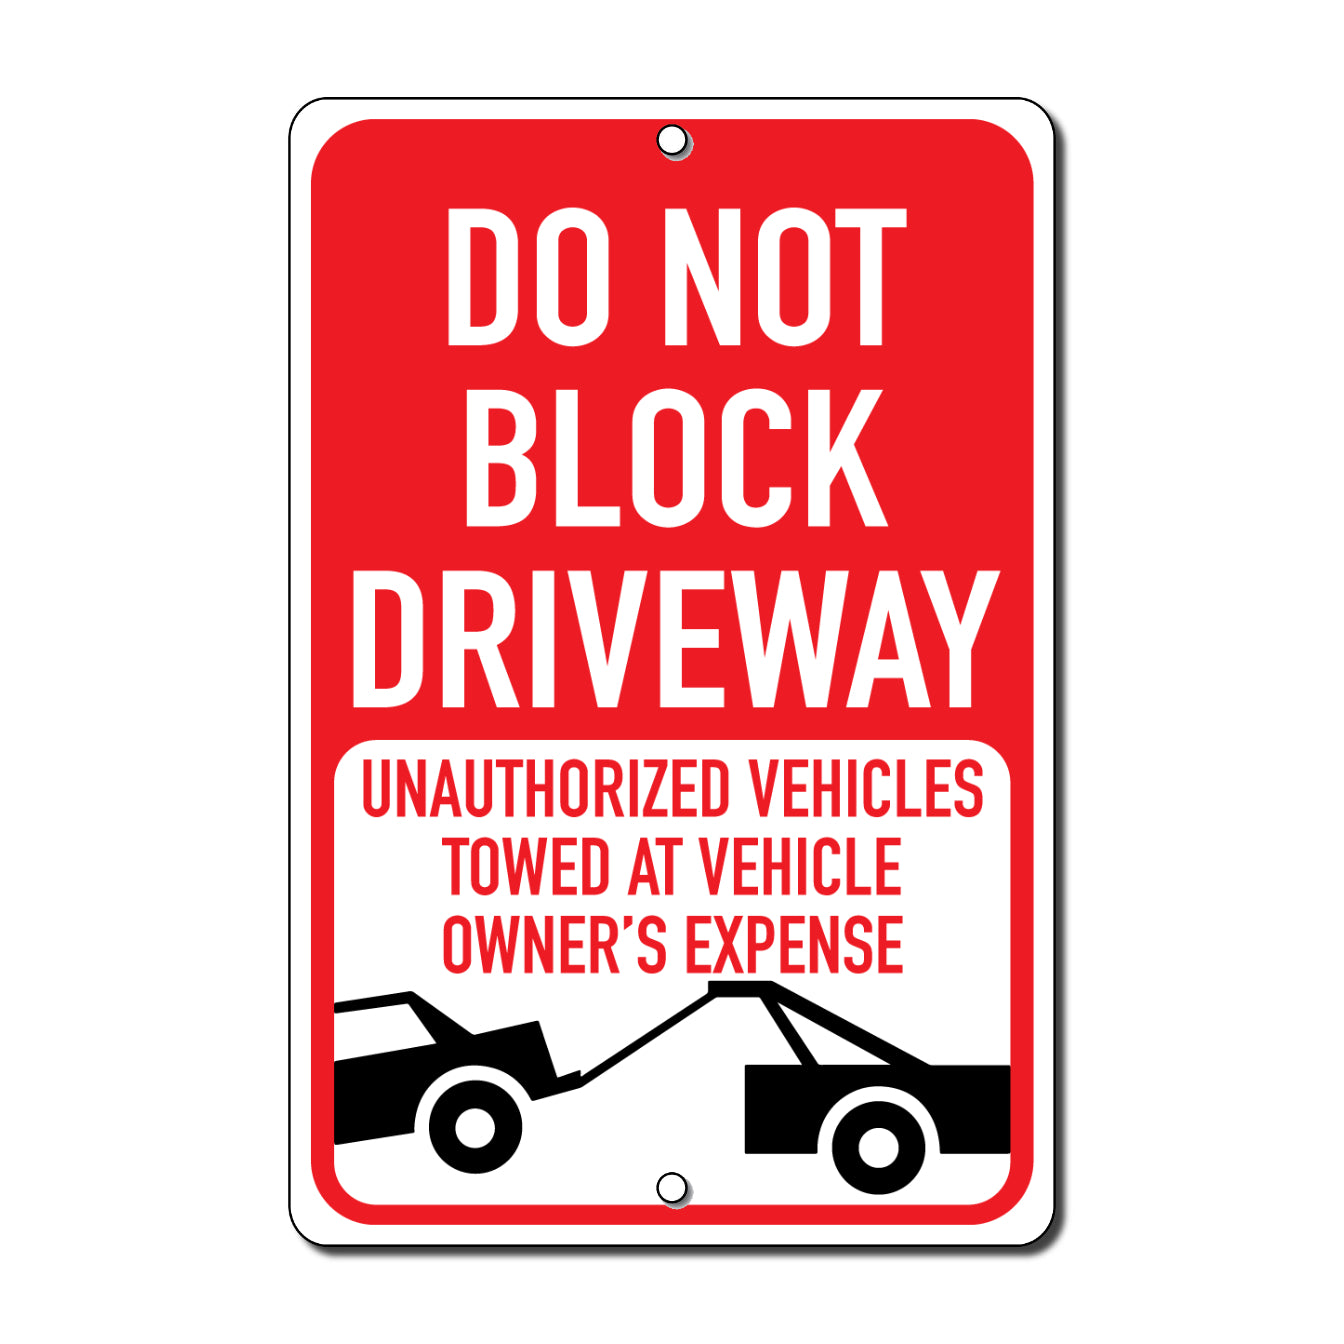 Do Not Block Driveway Sign, 12 x 18 inch, Aluminum or Styrene